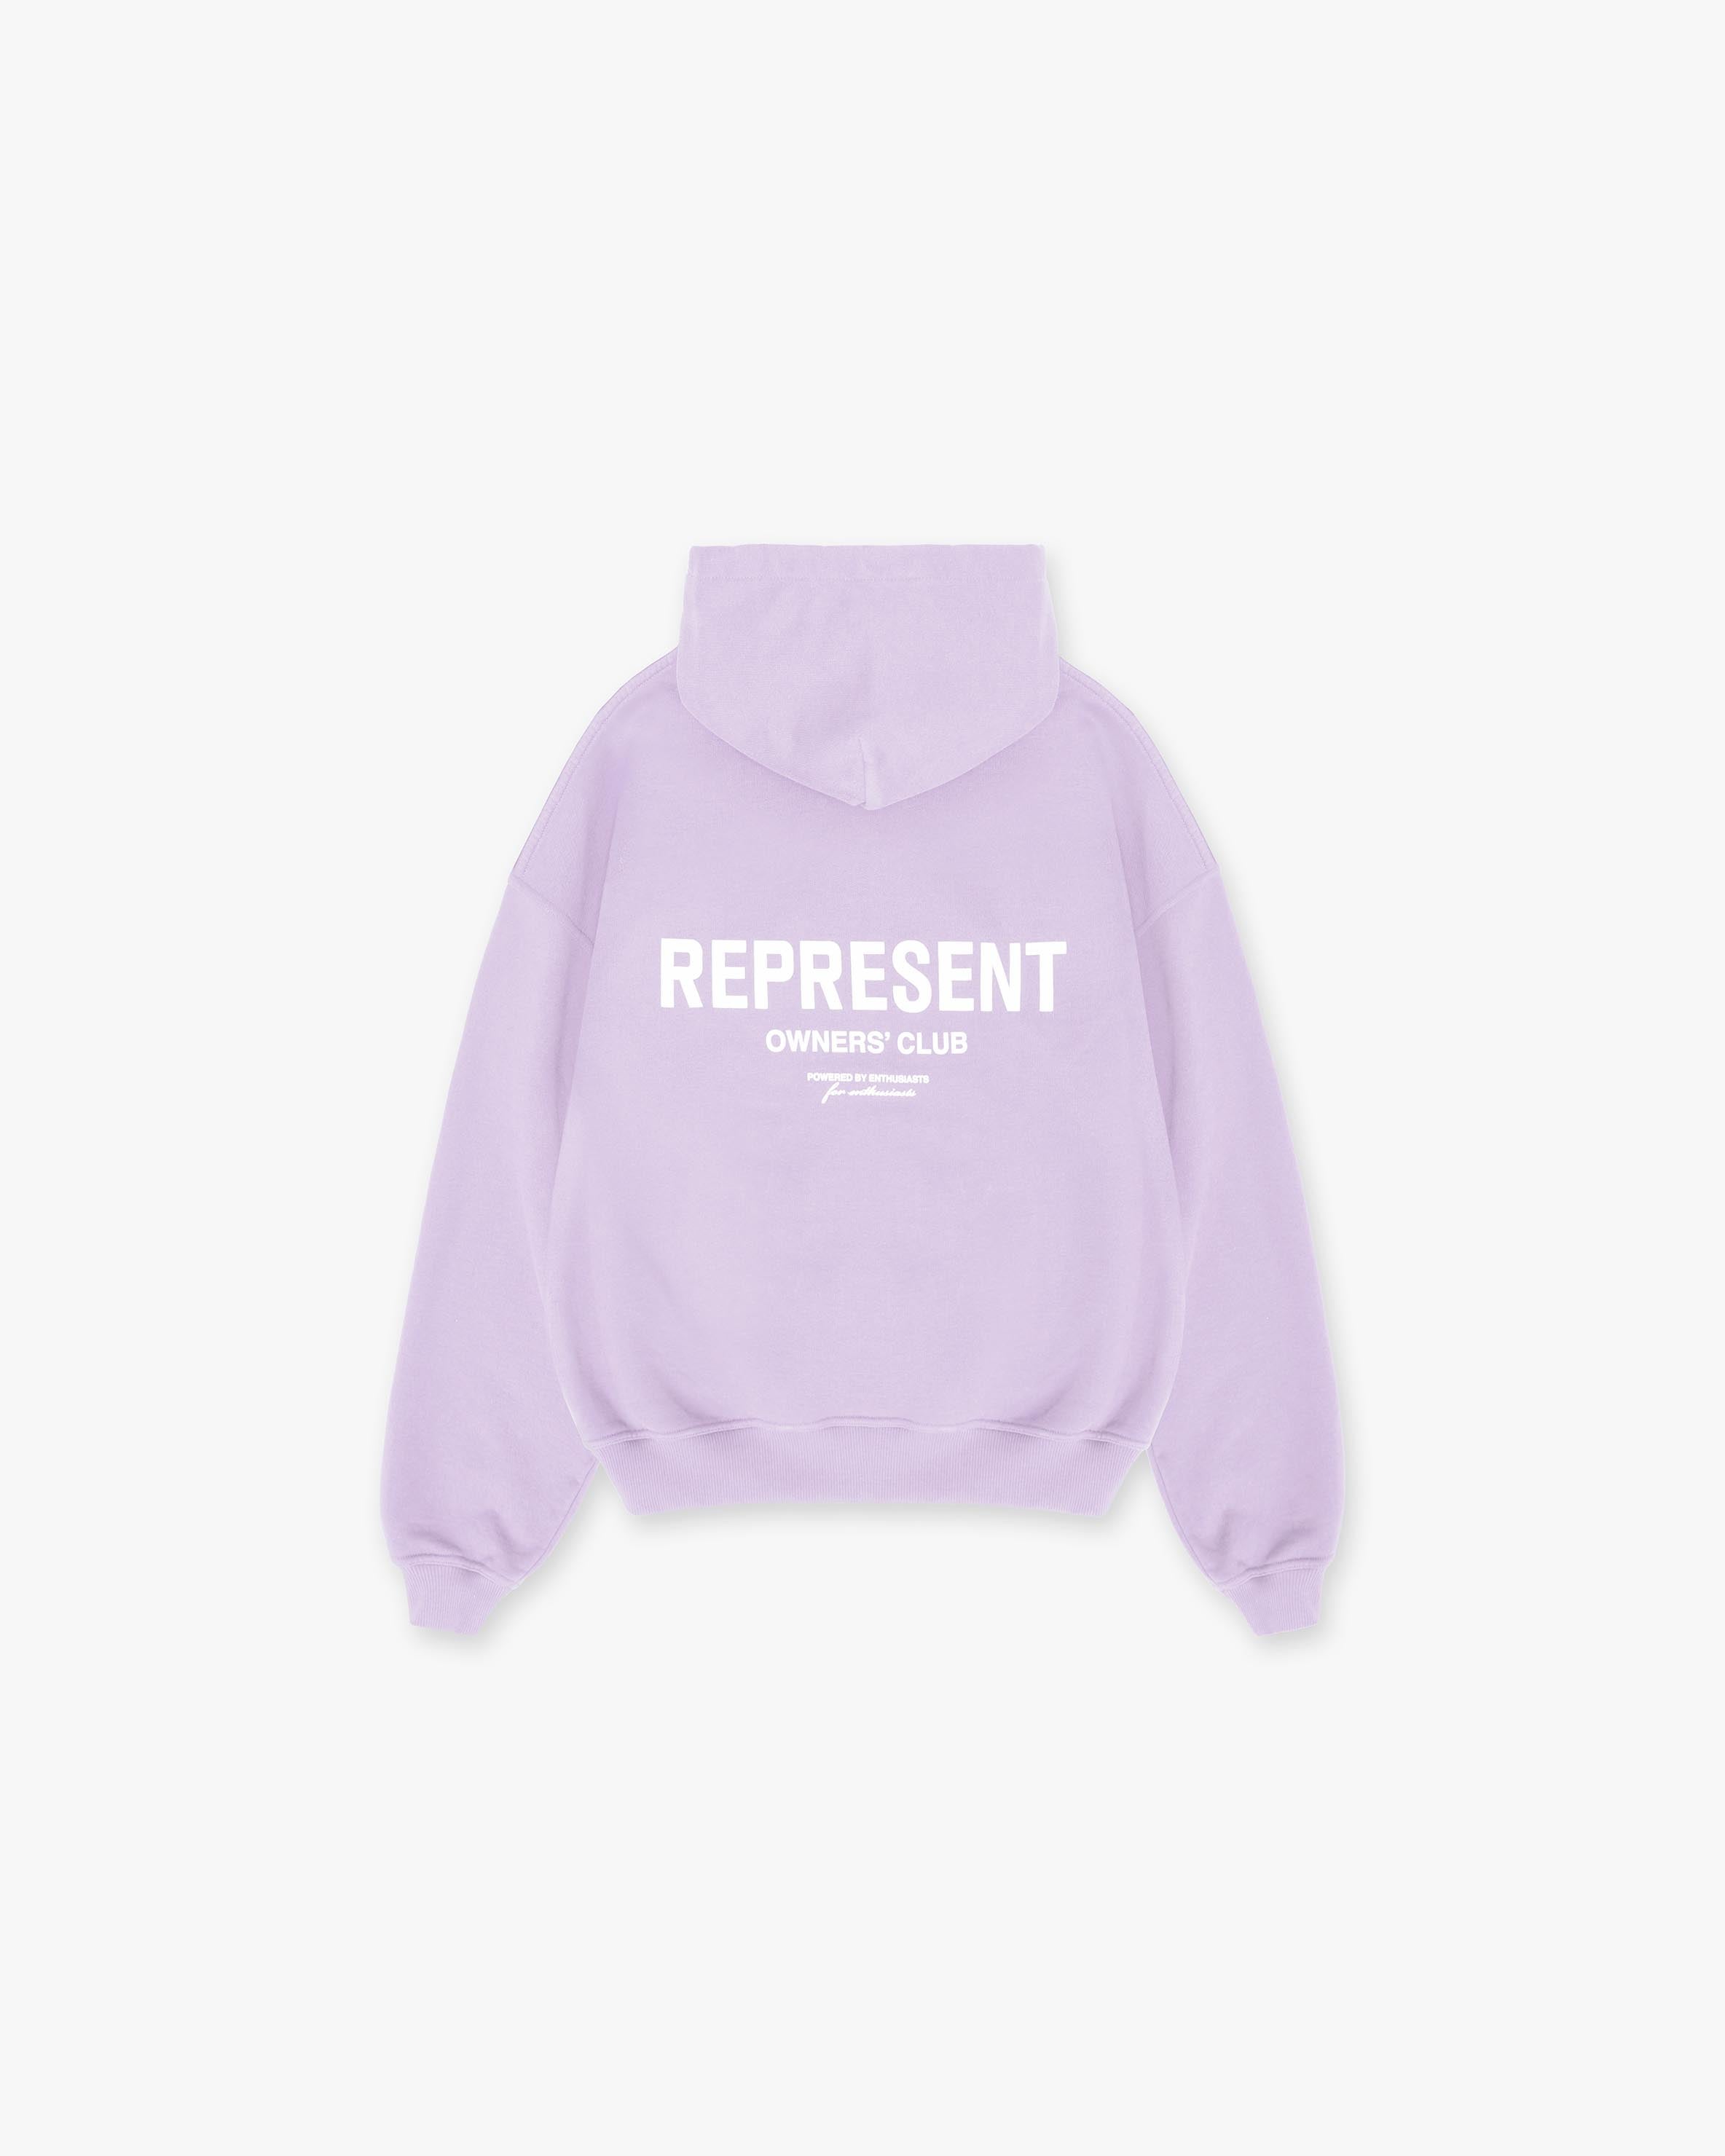 Represent Owners Club Hoodie | Lilac Hoodies Owners Club | Represent Clo